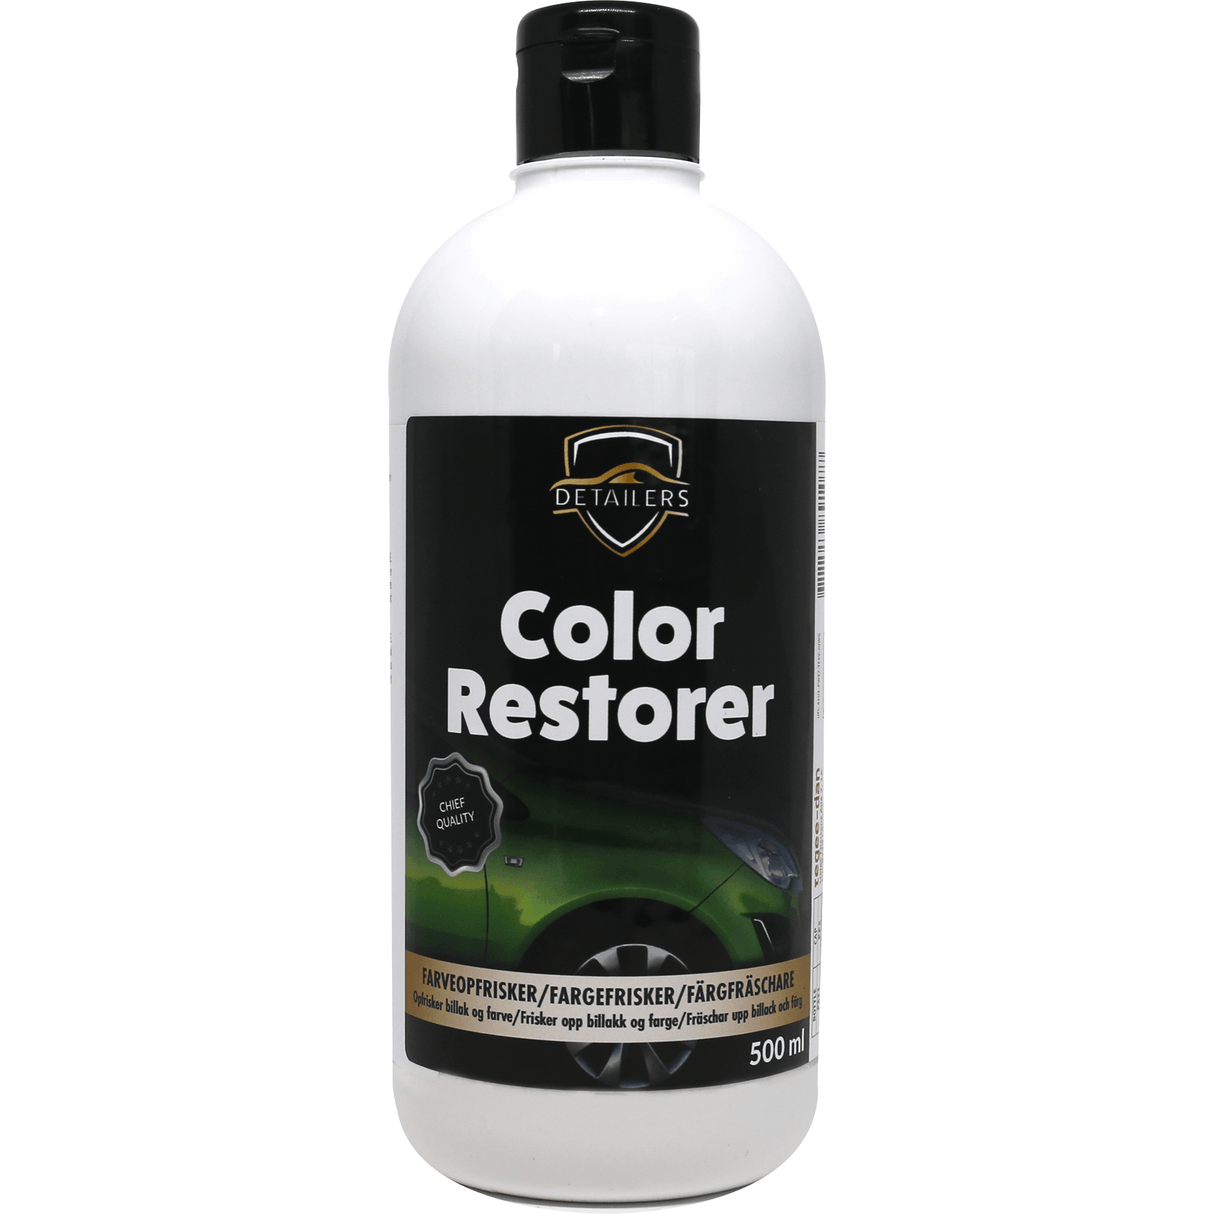 DETAILERS Color Restorer 500ml - Xpert Cleaning